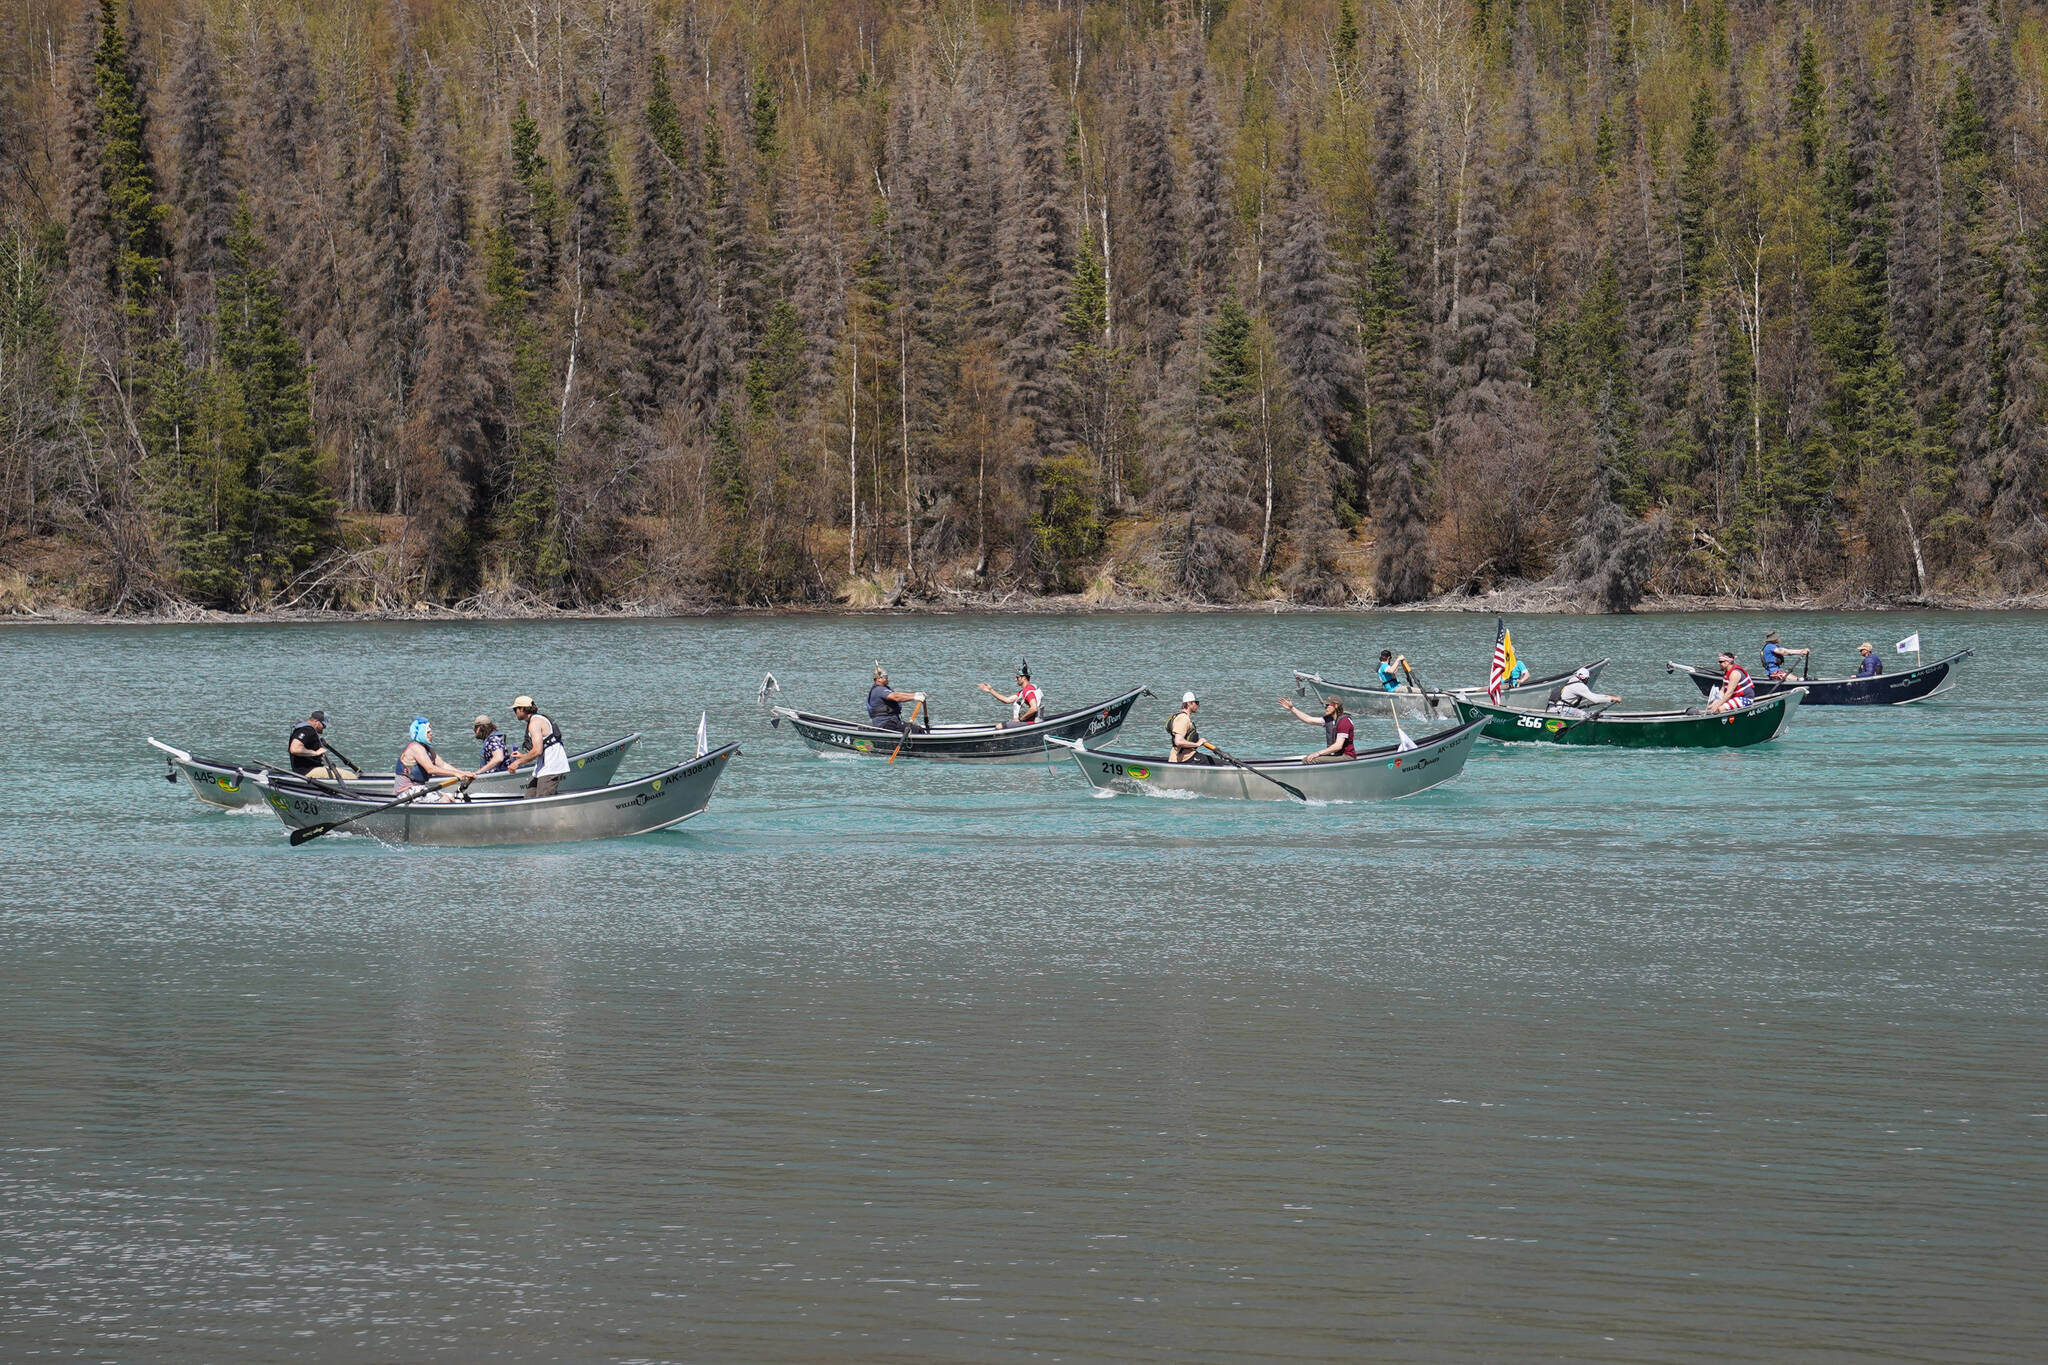 Contestants race down the Kenai River during the 16th Annual Cooper Landing Drift Boat Regatta near the Eagle Landing Resort in Cooper Landing, Alaska, on Saturday, May 20, 2023. (Jake Dye/Peninsula Clarion)